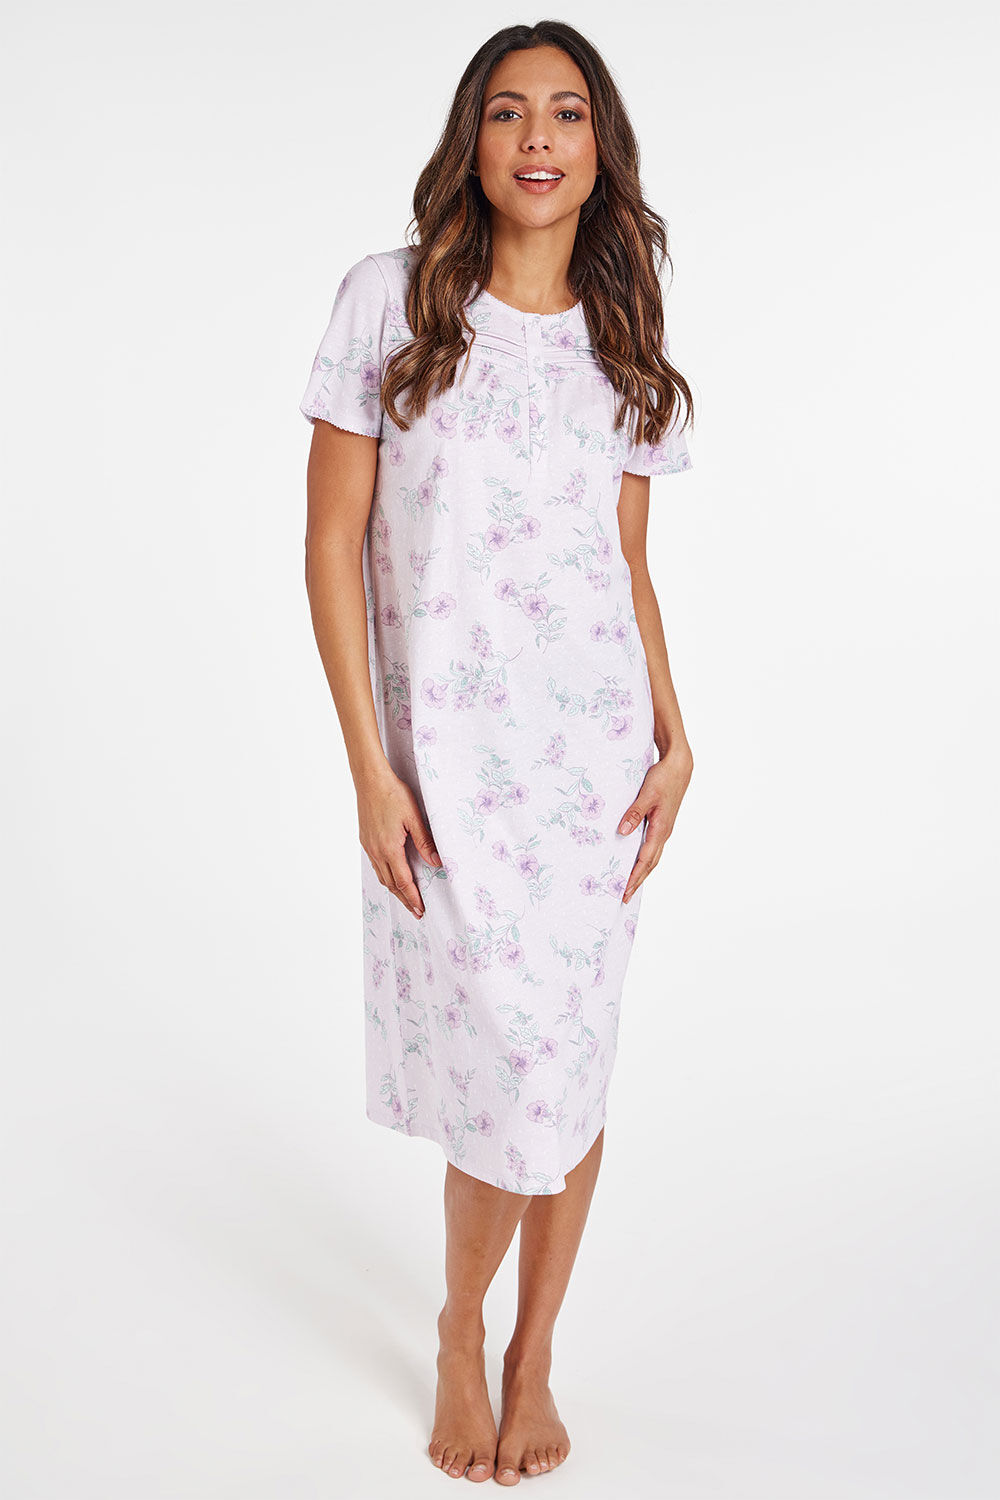 Bonmarche Lilac Short Sleeve Floral and Spot Print Nightdress, Size: 12-14